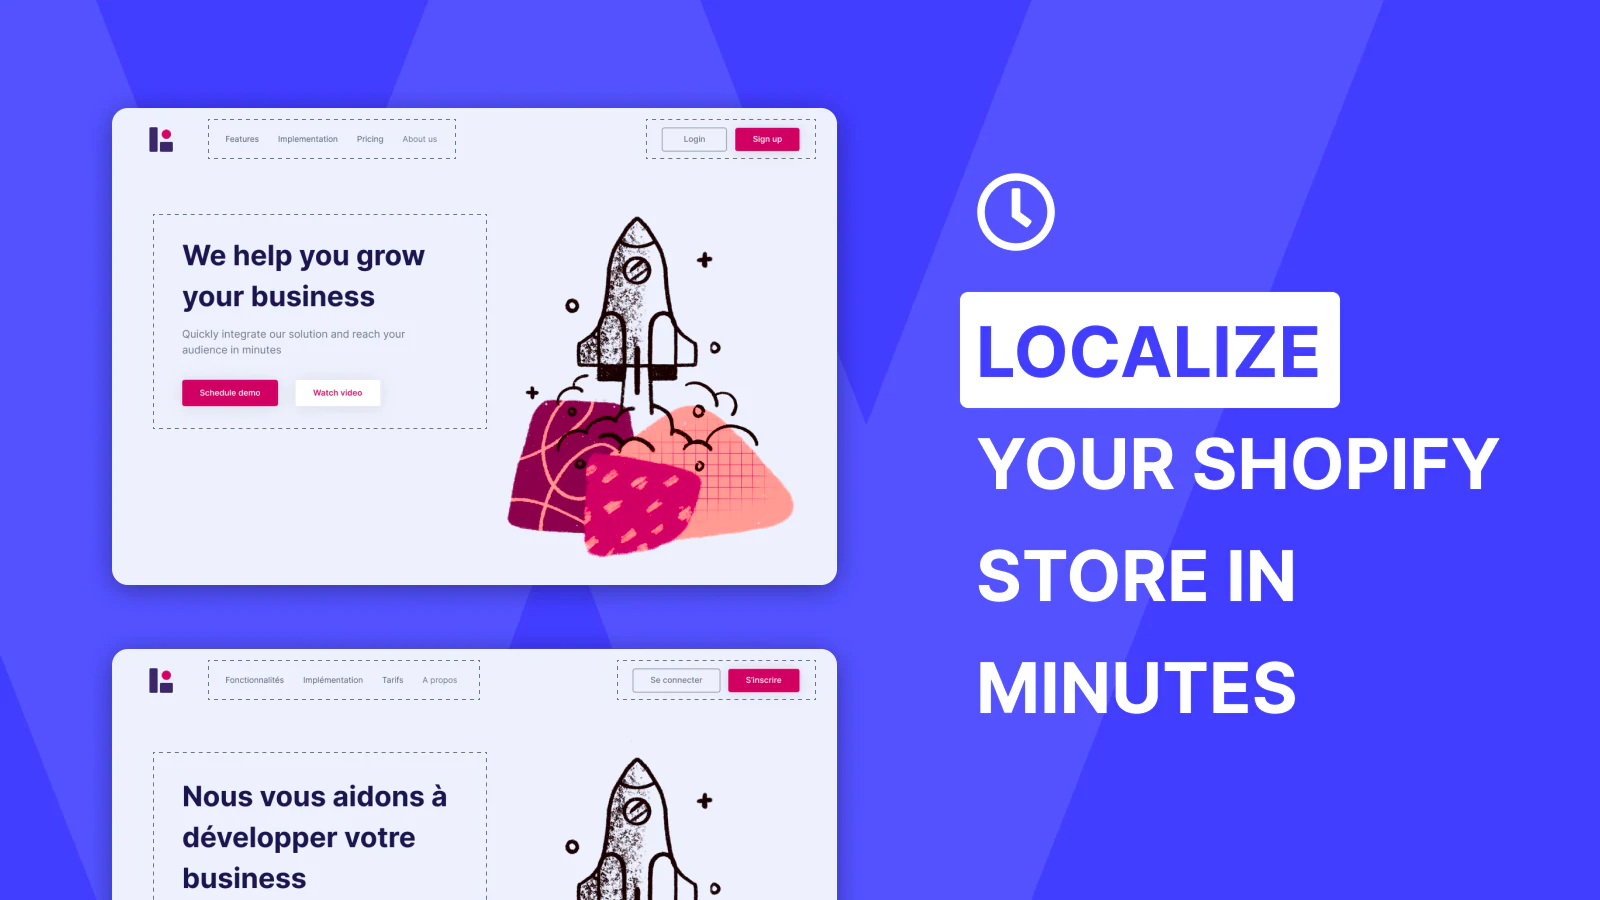 "Localize your Shopify store in minutes" next to a picture of Weglot's on-page localization tool